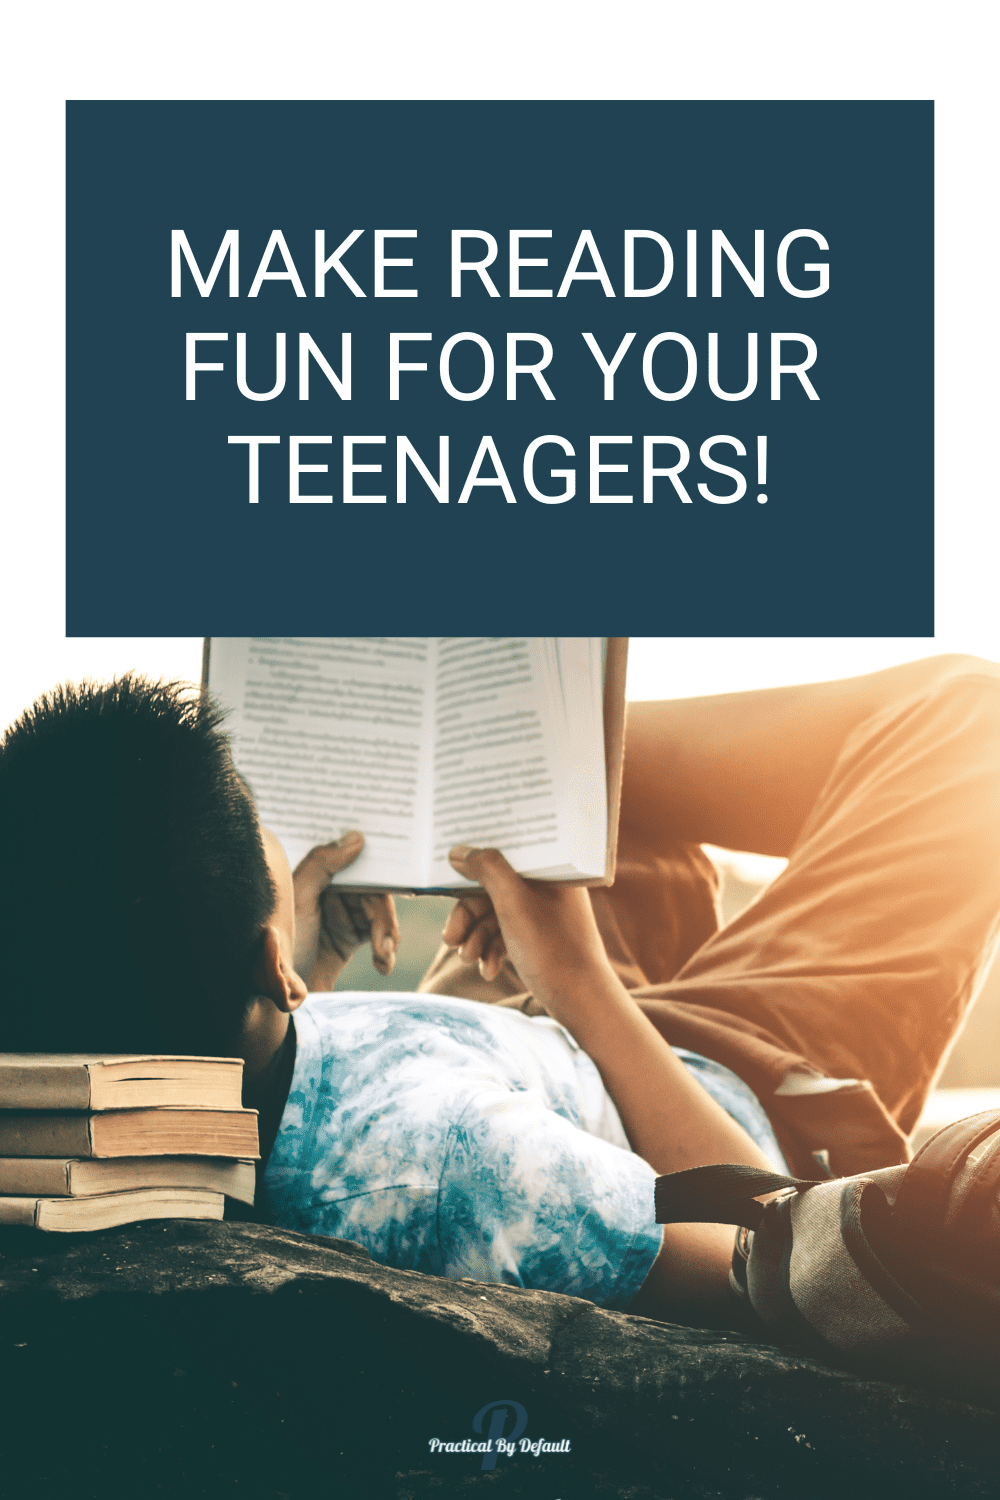 How to Make Reading Fun For Your Teenager